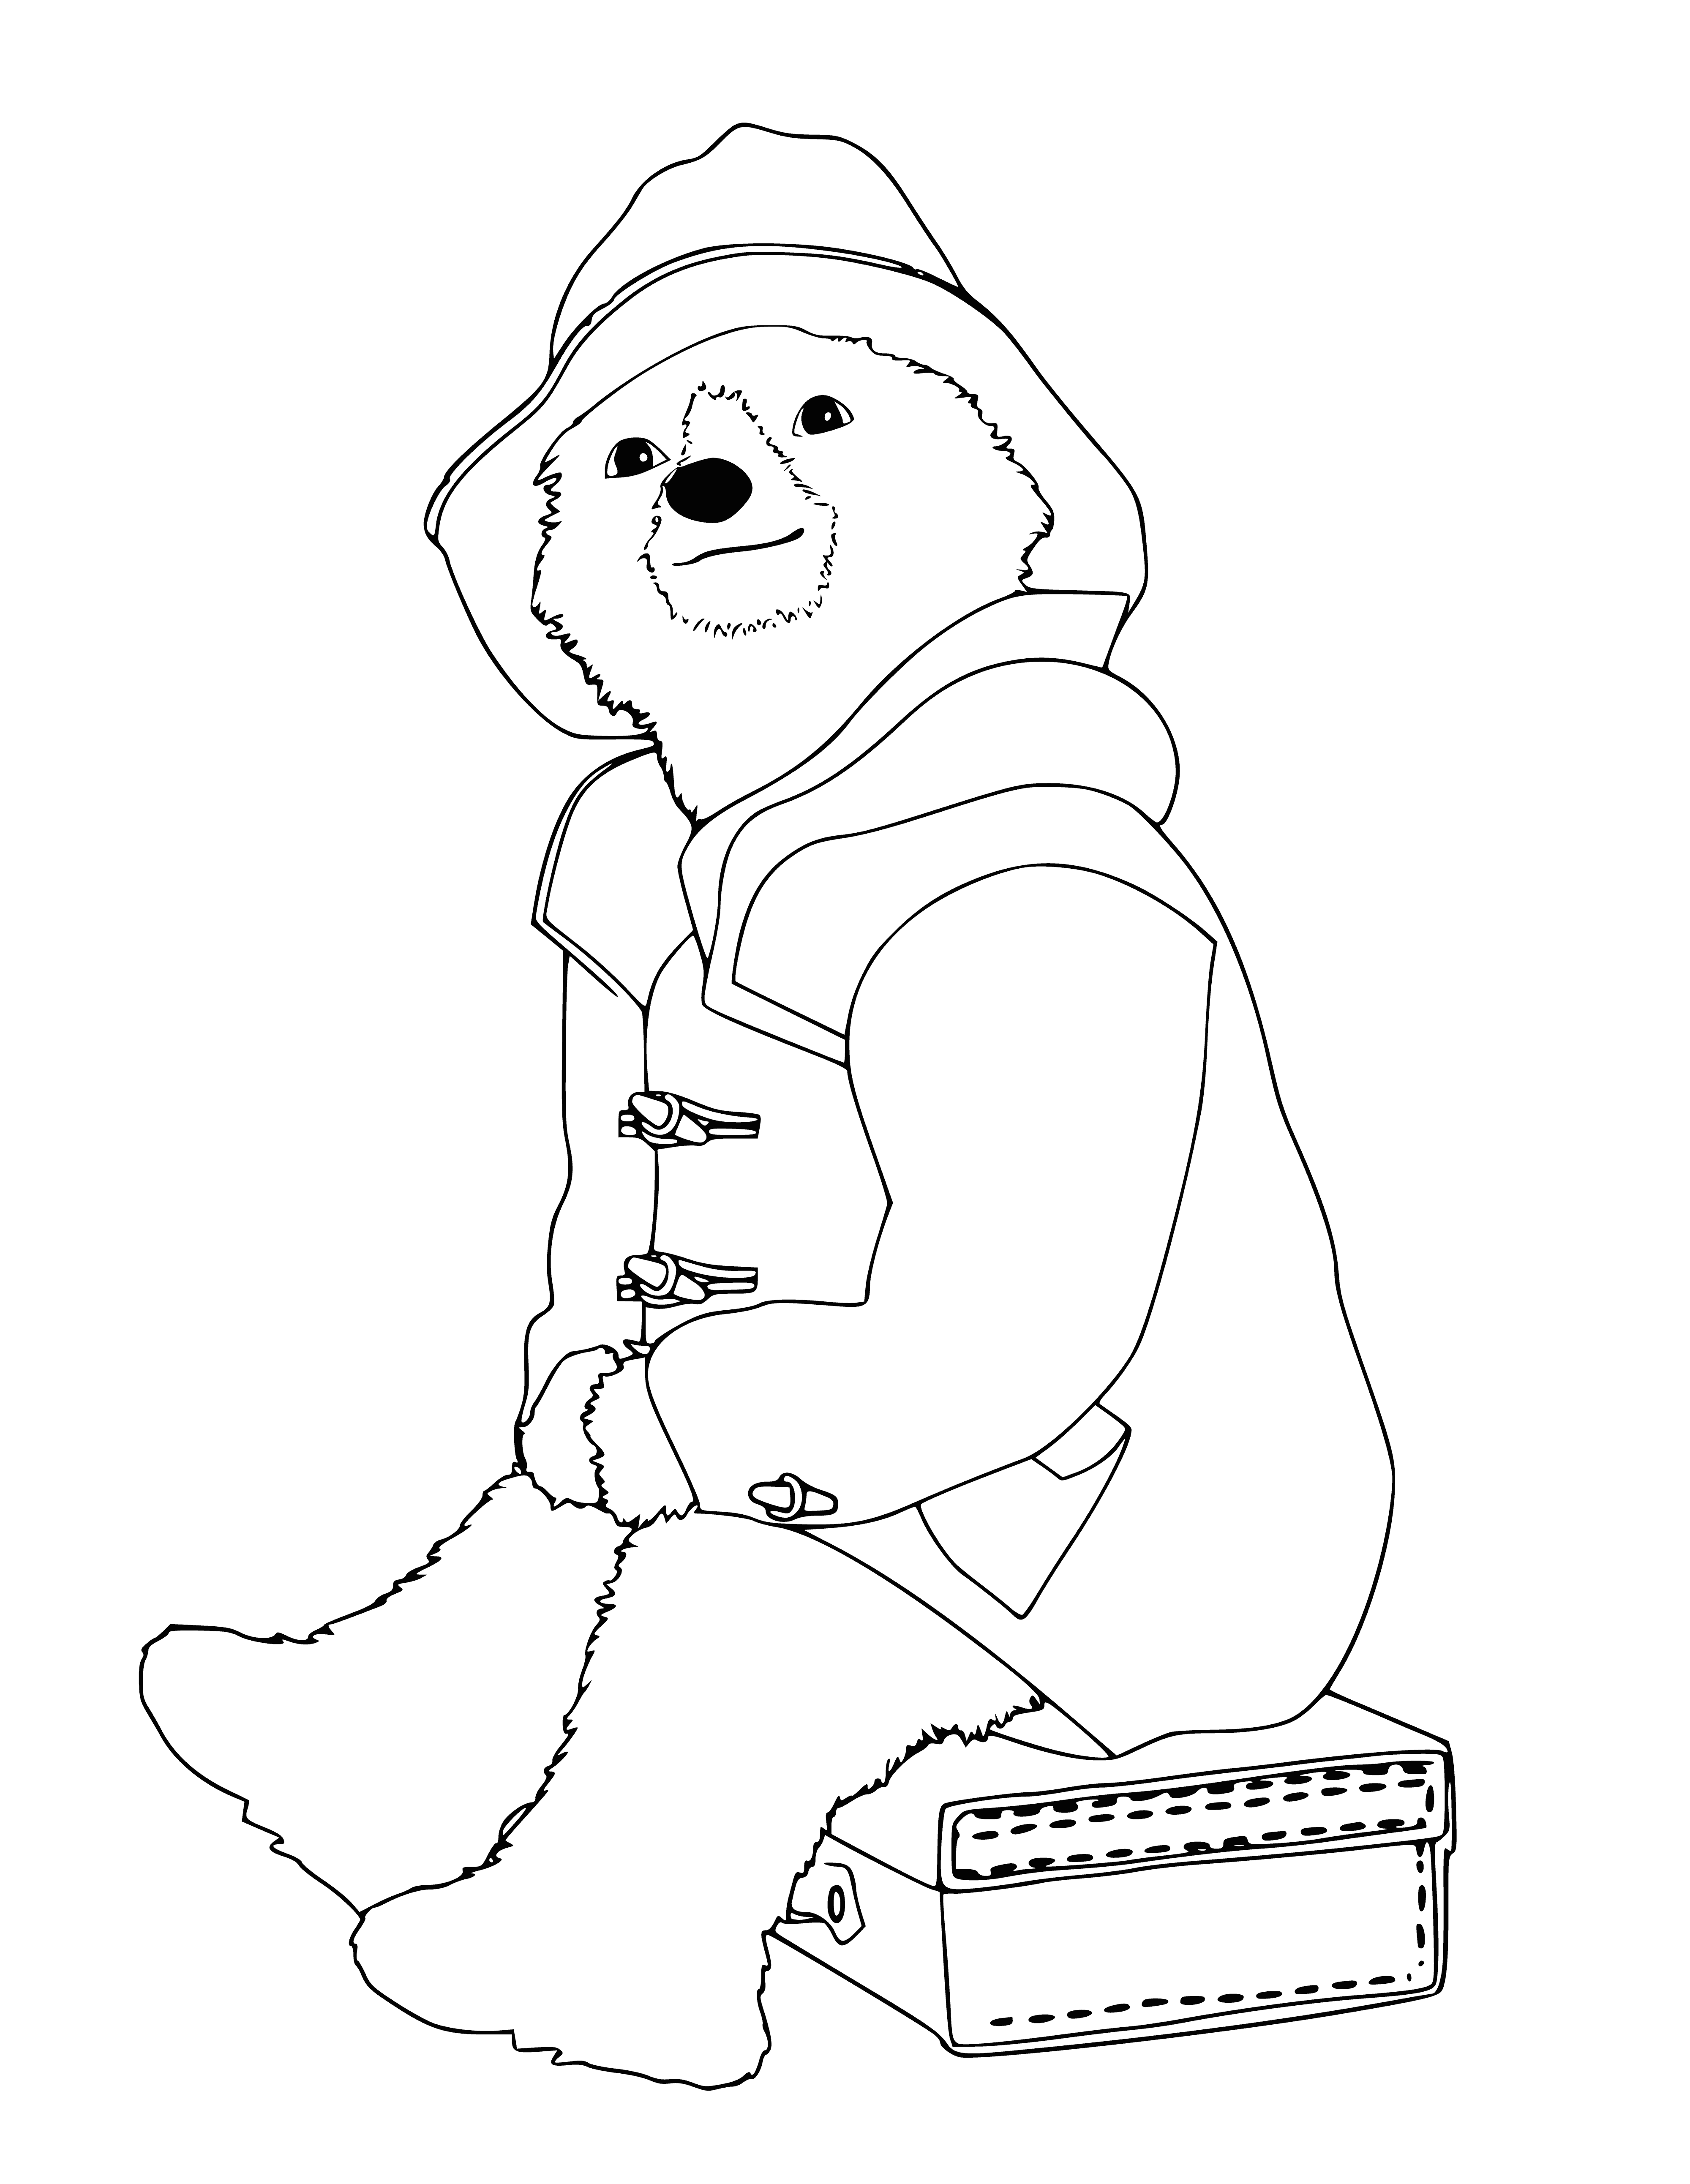 coloring page: An endearing bear, Paddington, looking wistfully from a red suitcase, wearing a black hat. #PaddingtonBear #ClassicBear